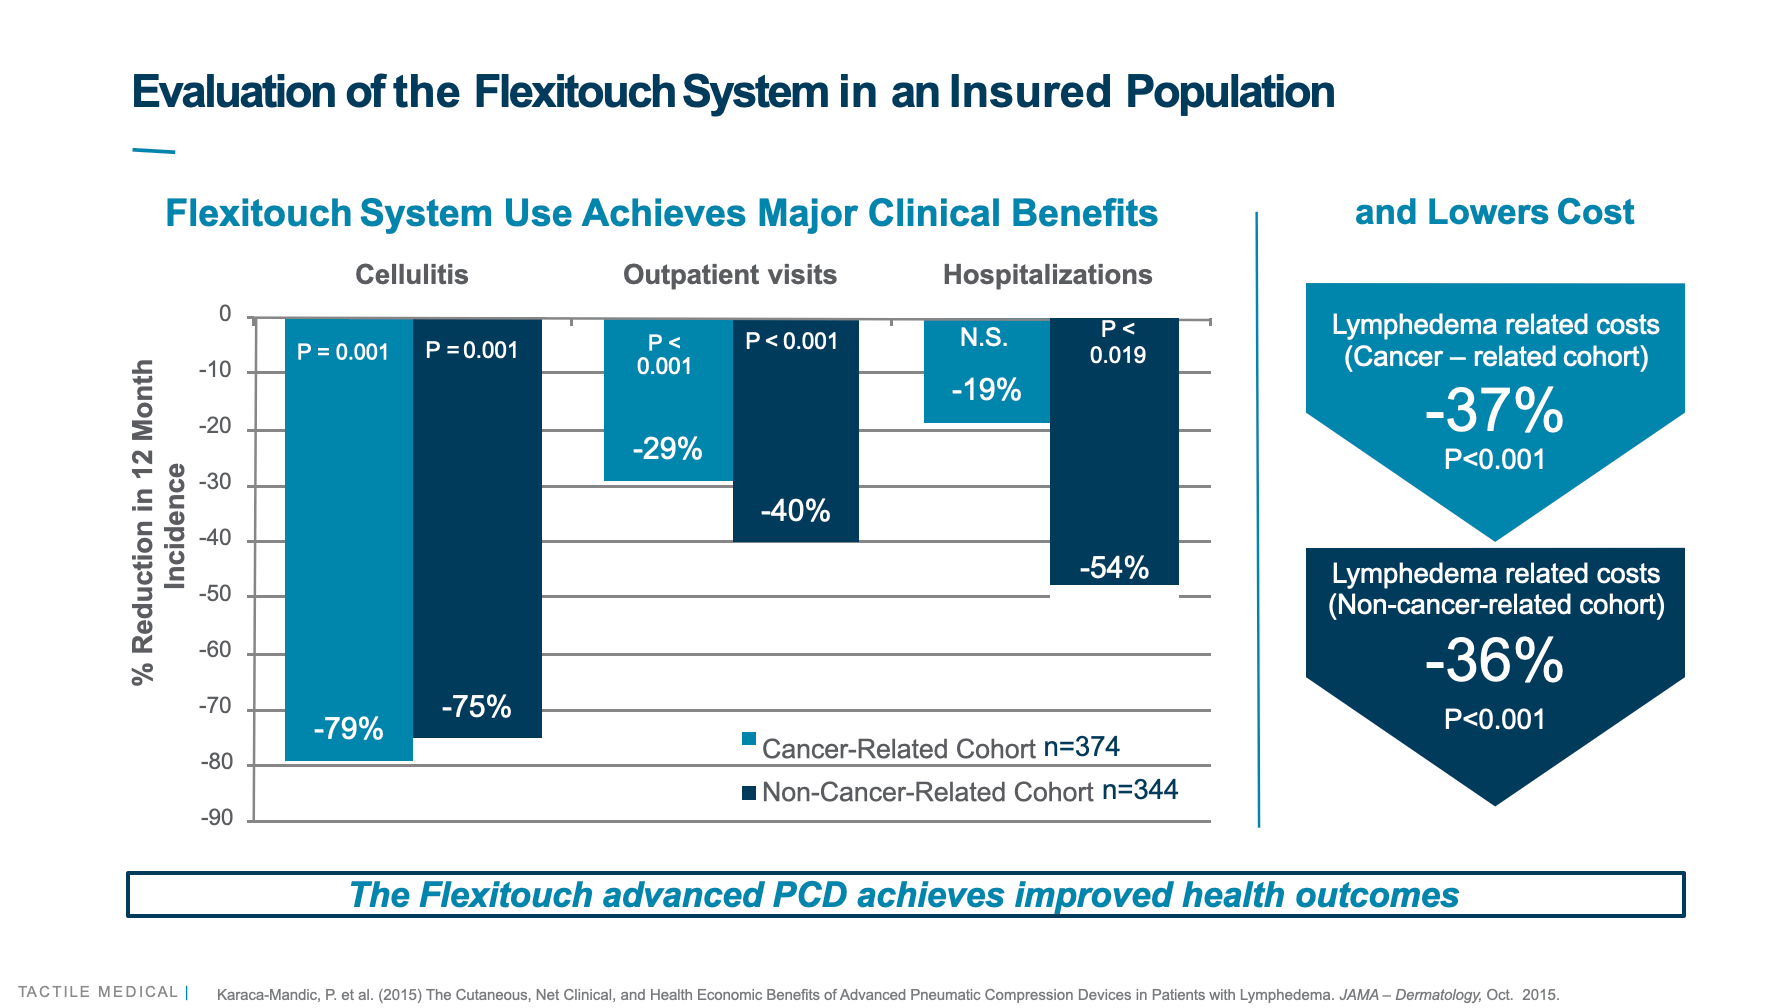 Bar chart evaluating the flexitouch system in an insured population